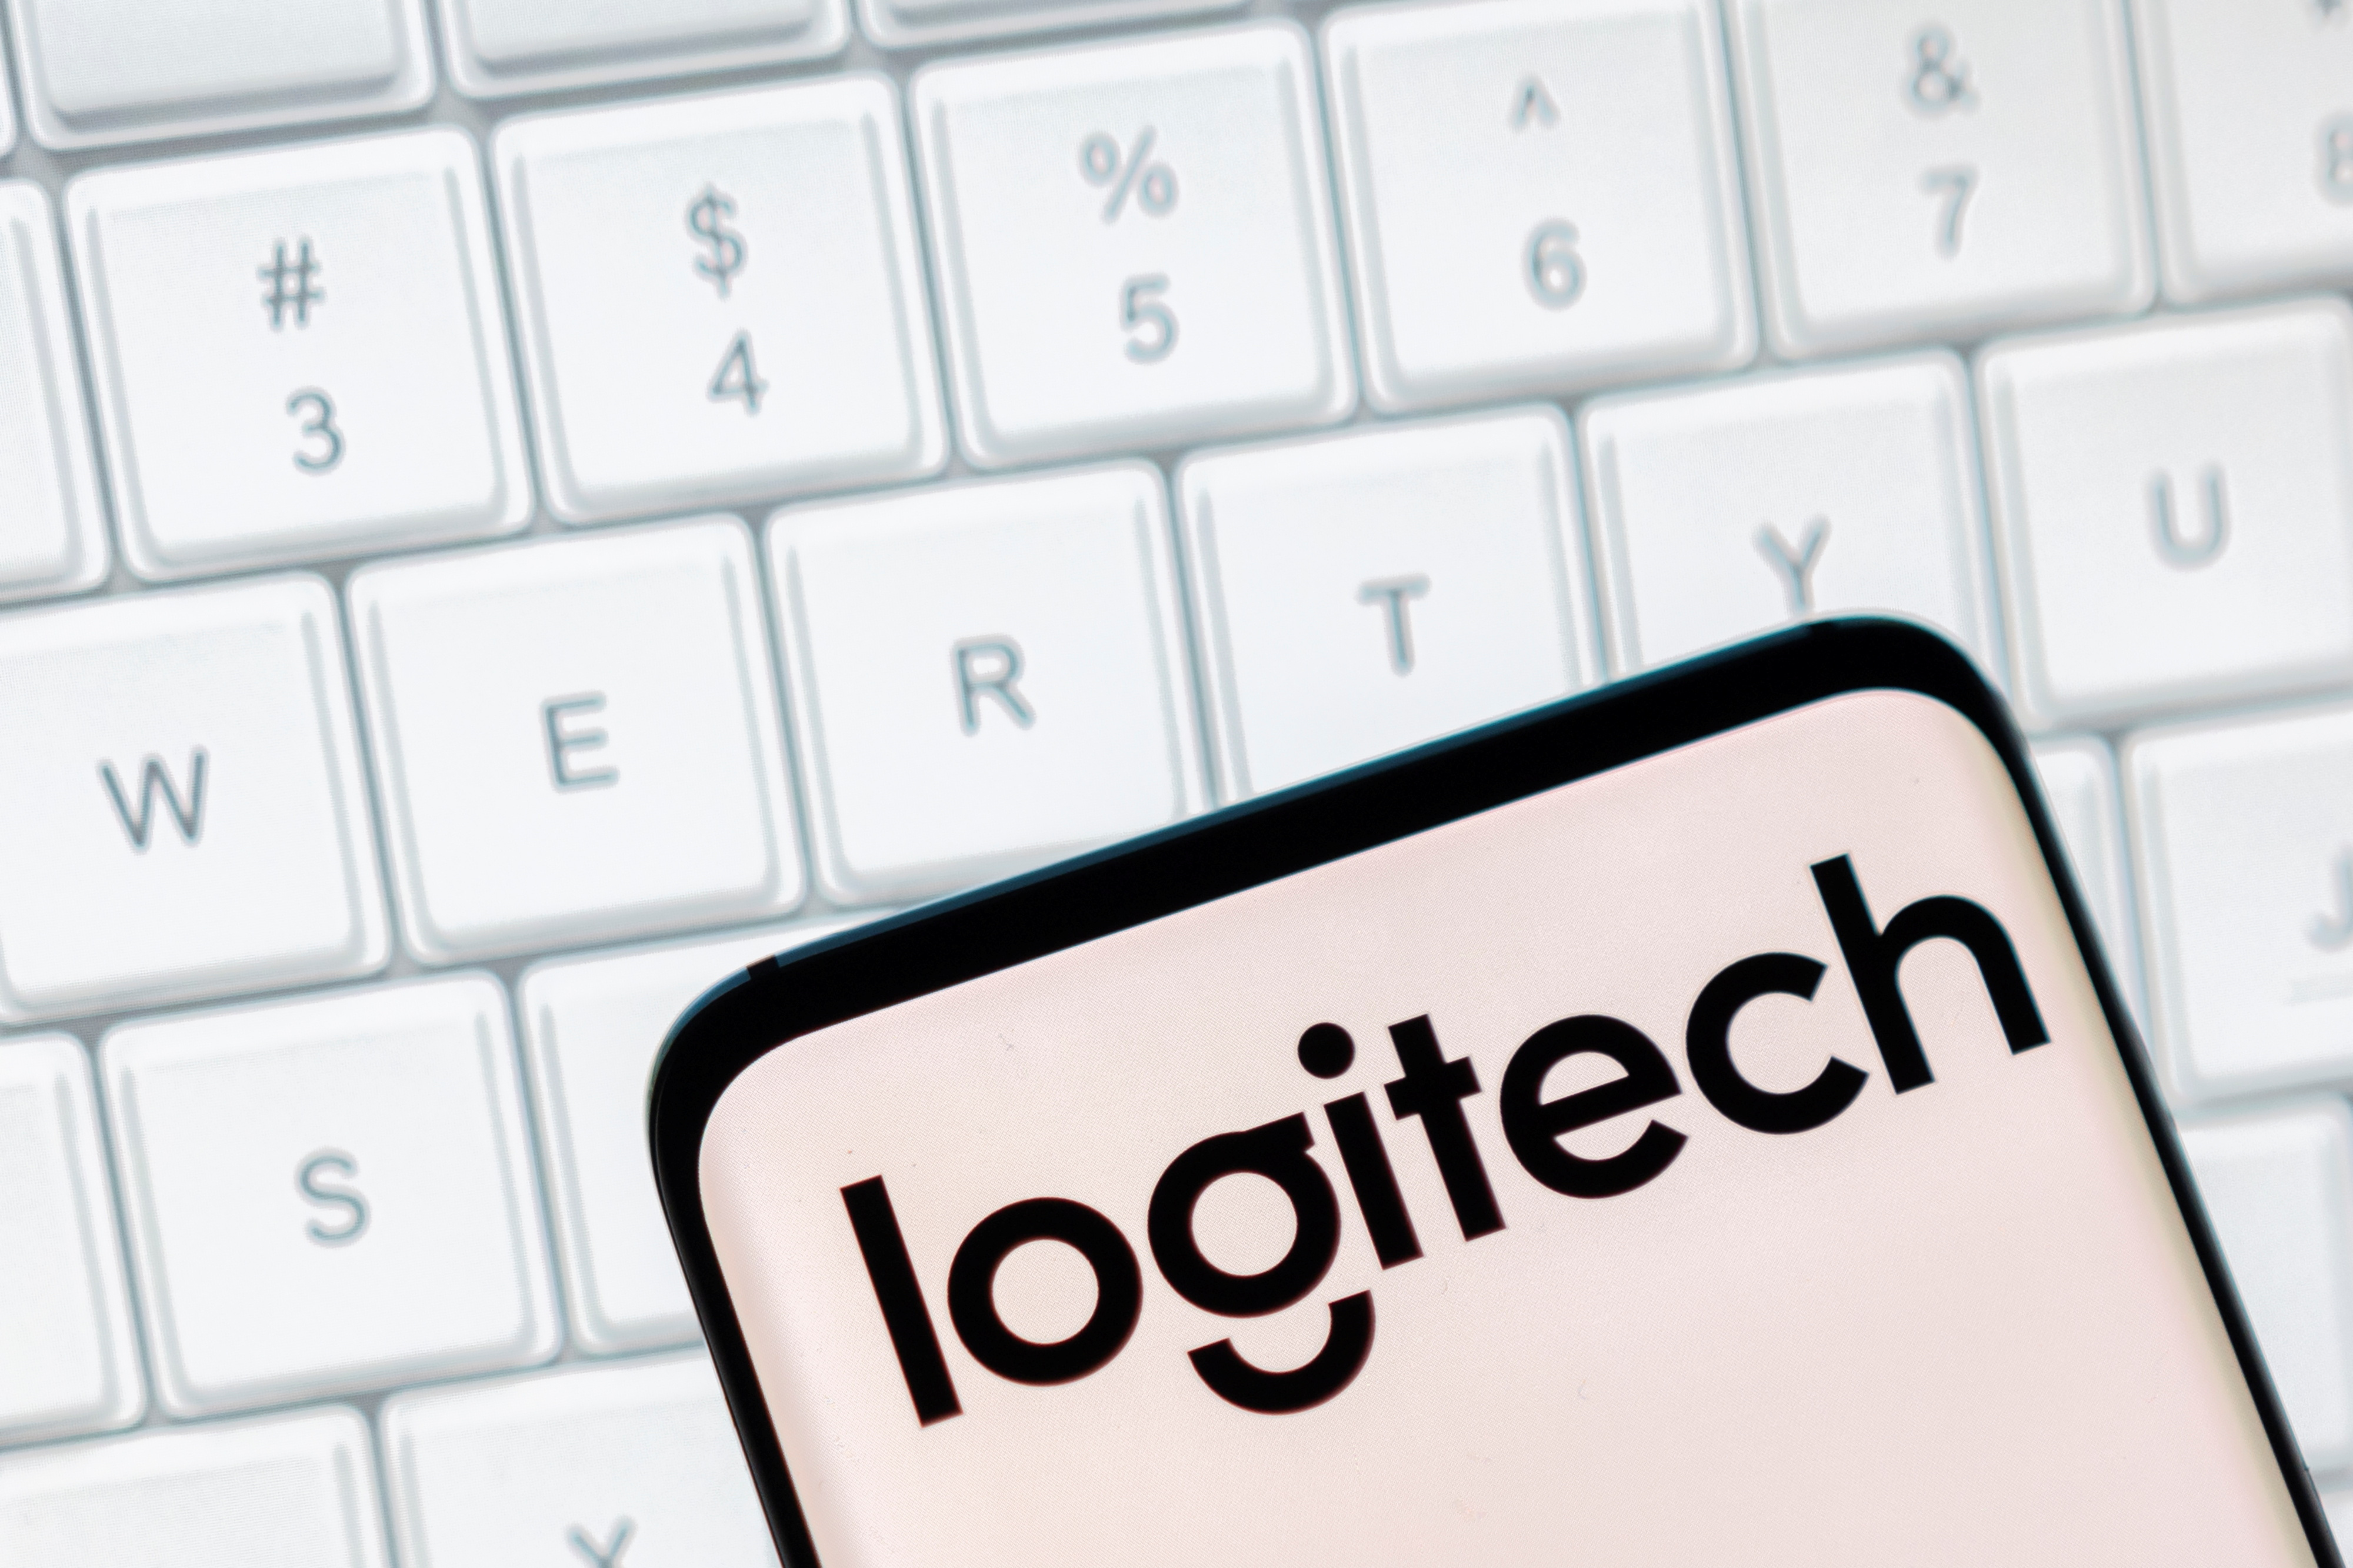 Logitech beats earnings estimates and forecast, lifting shares Reuters